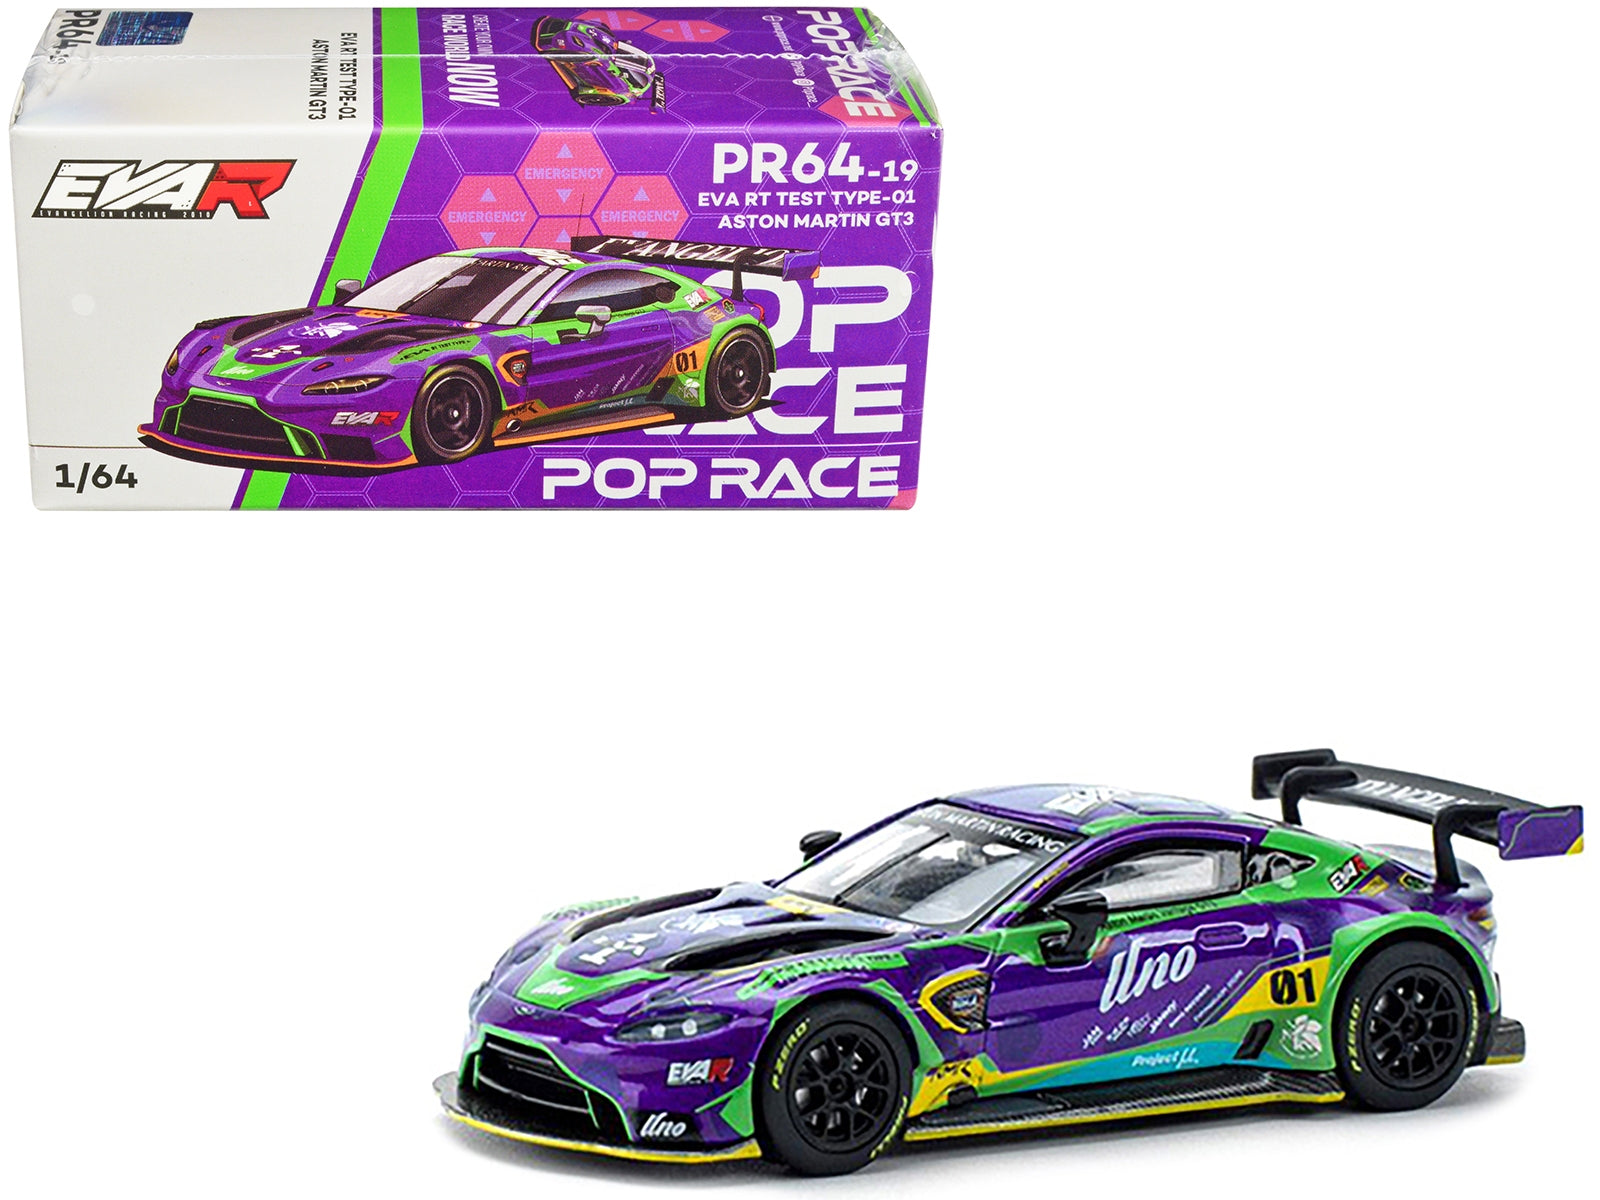 Aston Martin GT3 RHD (Right Hand Drive) "EVA RT Test Type-01" Purple with Graphics 1/64 Diecast Model Car by Pop Race